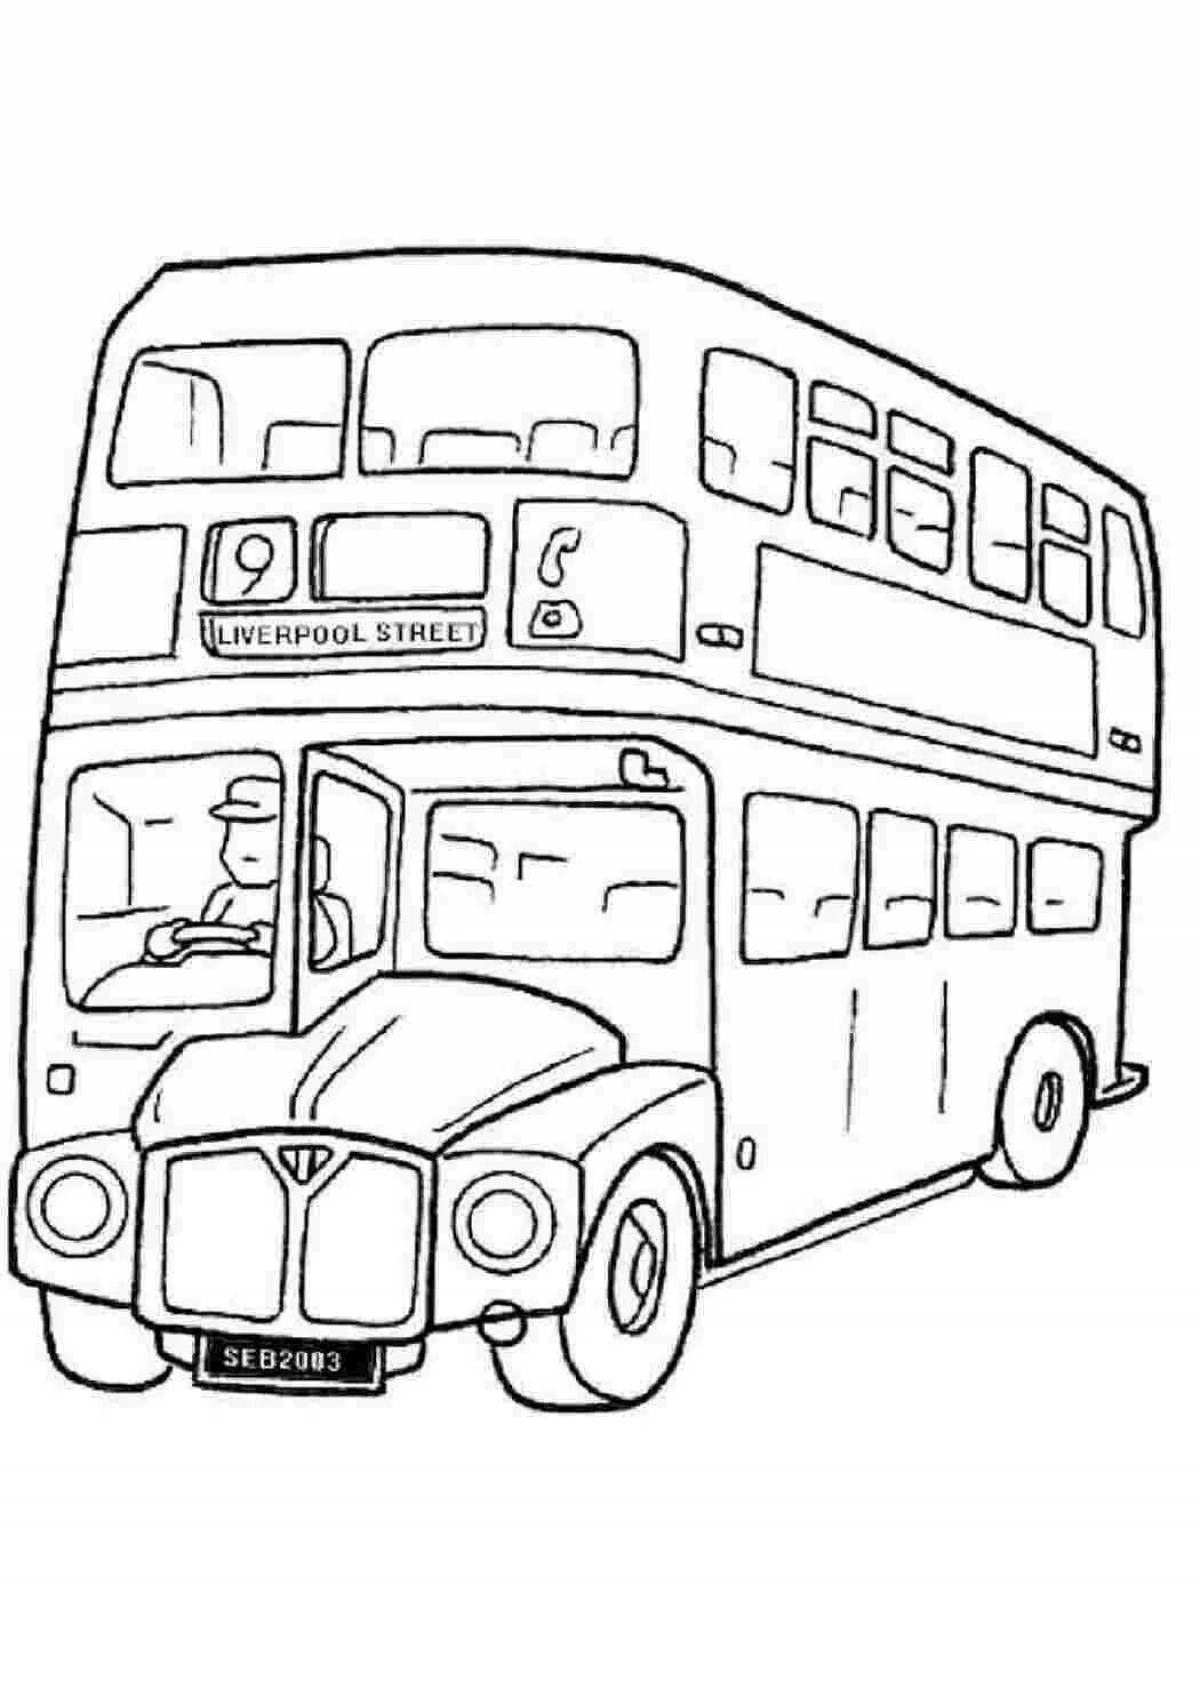 Colorful english bus coloring page